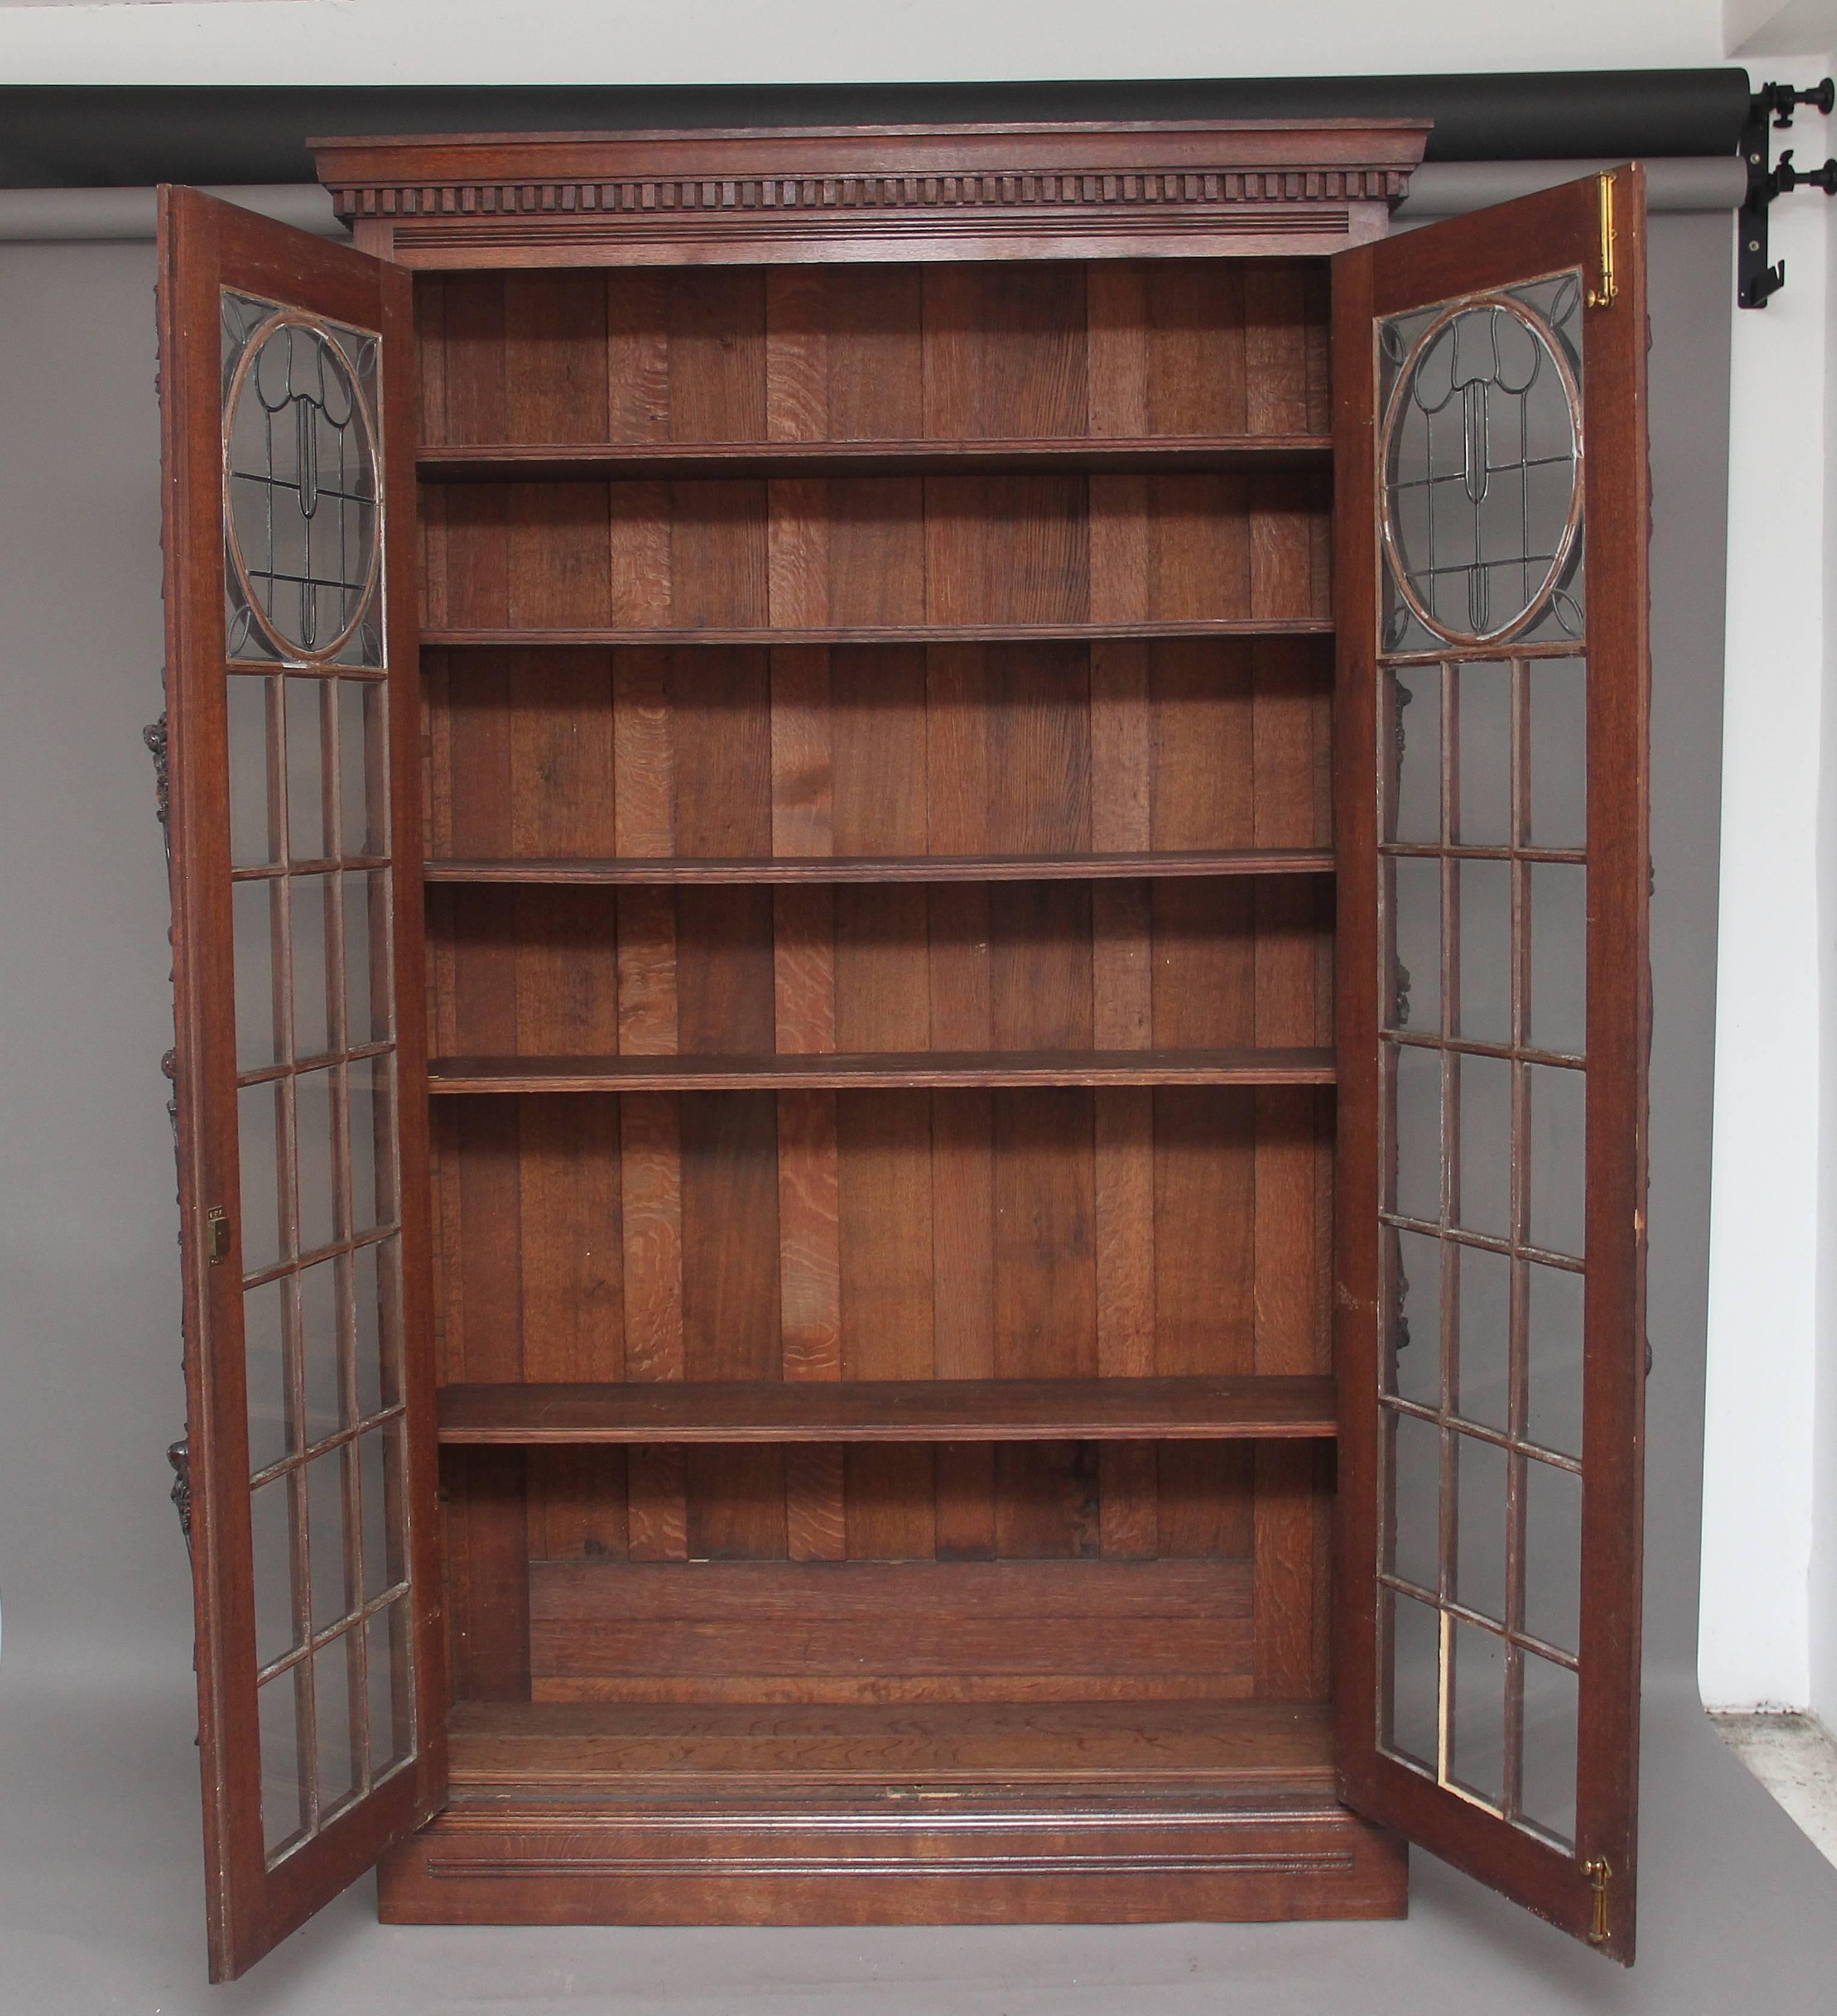 A large 19th century carved oak bookcase in the arts and craft style, having a moulded edge cornice decorated with dentil moulding, the bookcase enclosed with a pair of mackintosh style leaded light astragal glazed doors opening to reveal six